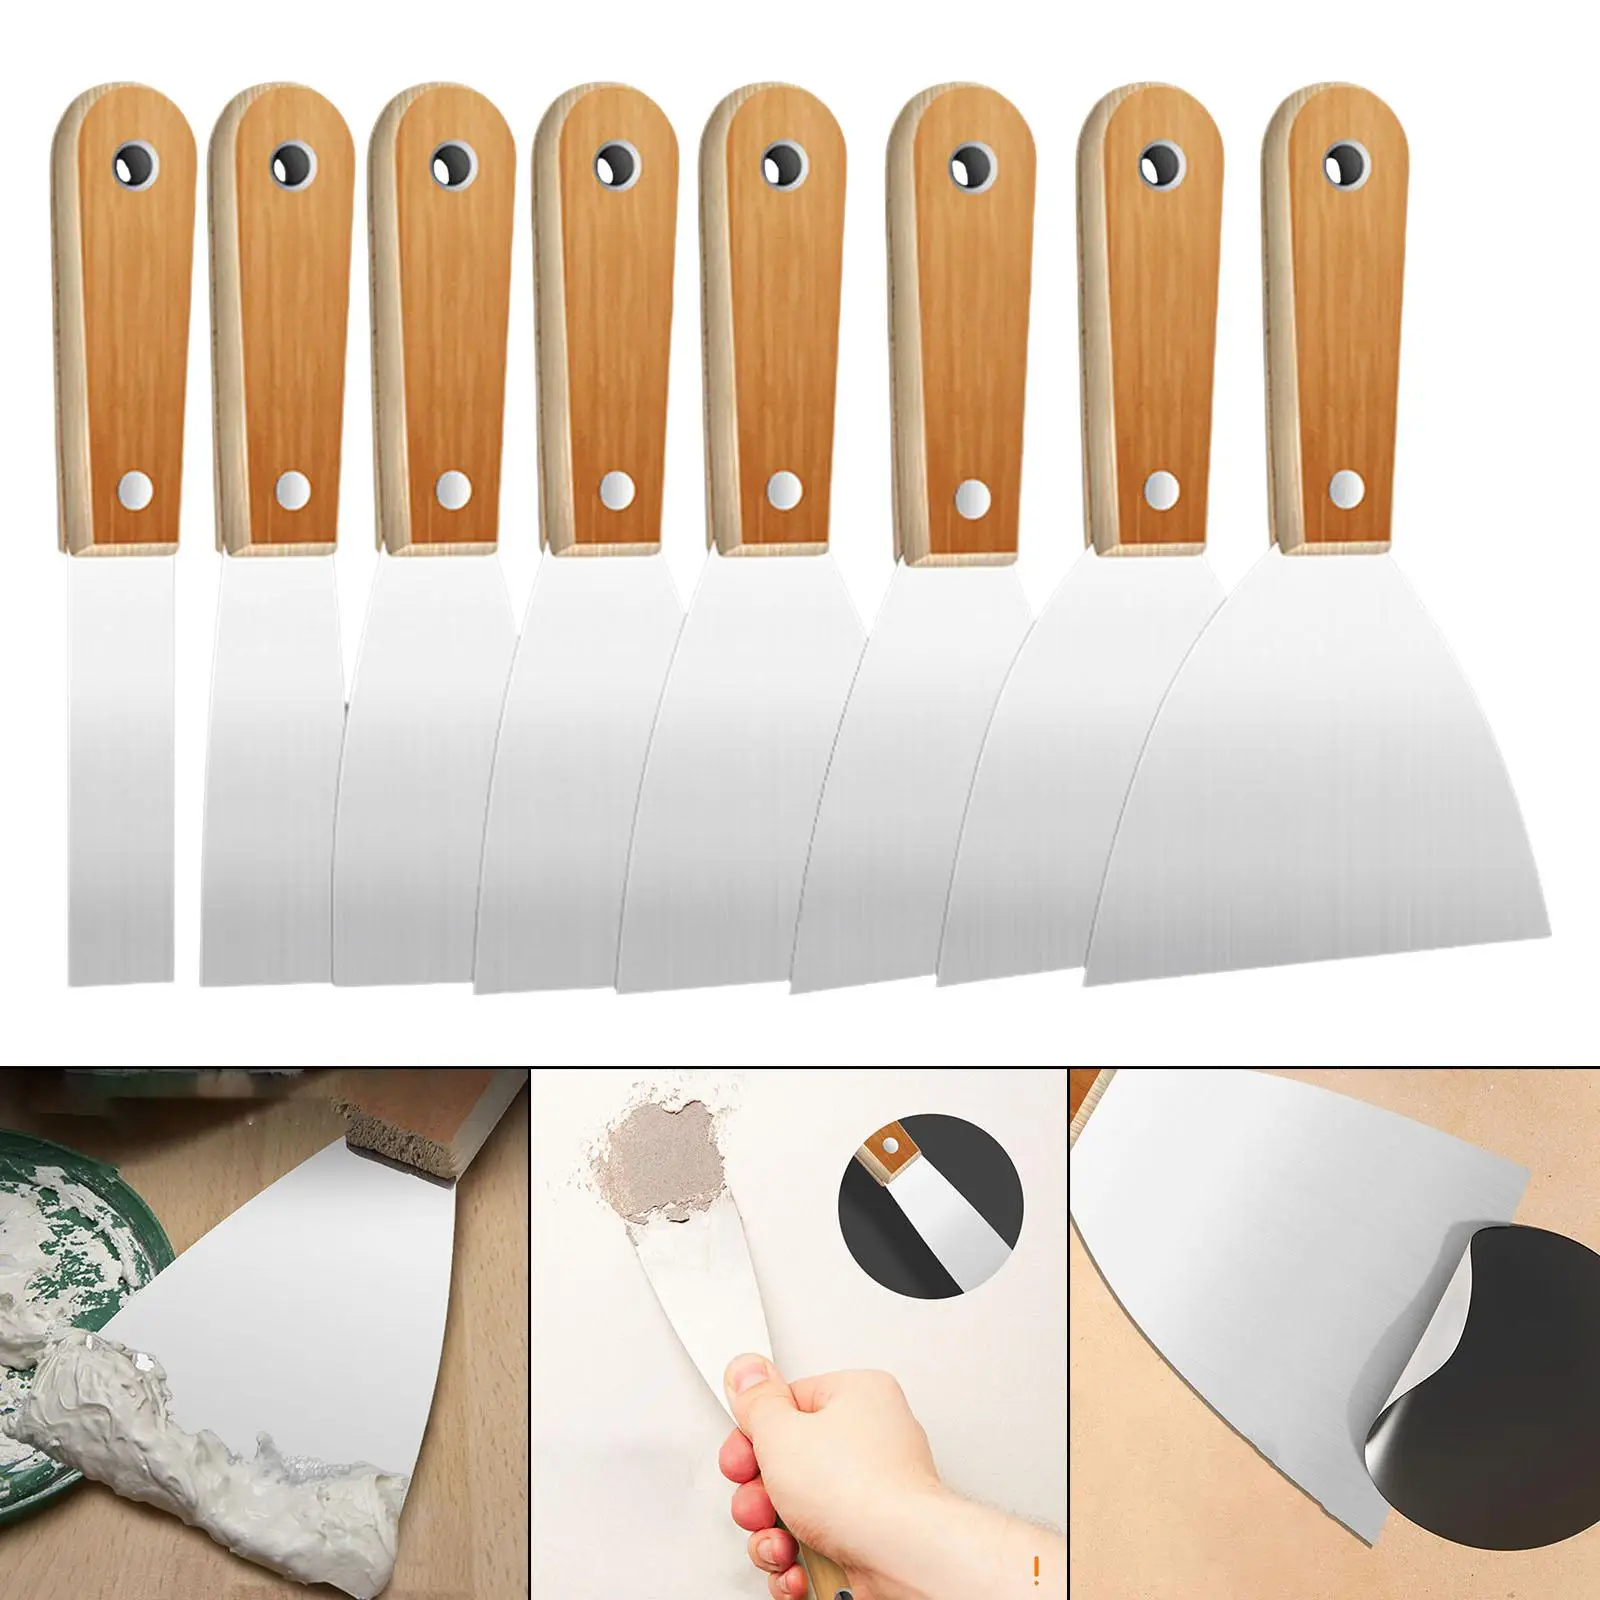 8Pcs Putty Scrapers Spatula Shovel Tools Construction Tools Wallpaper Scraper for Dry Wall Cleaning Plastering Spreading Filling